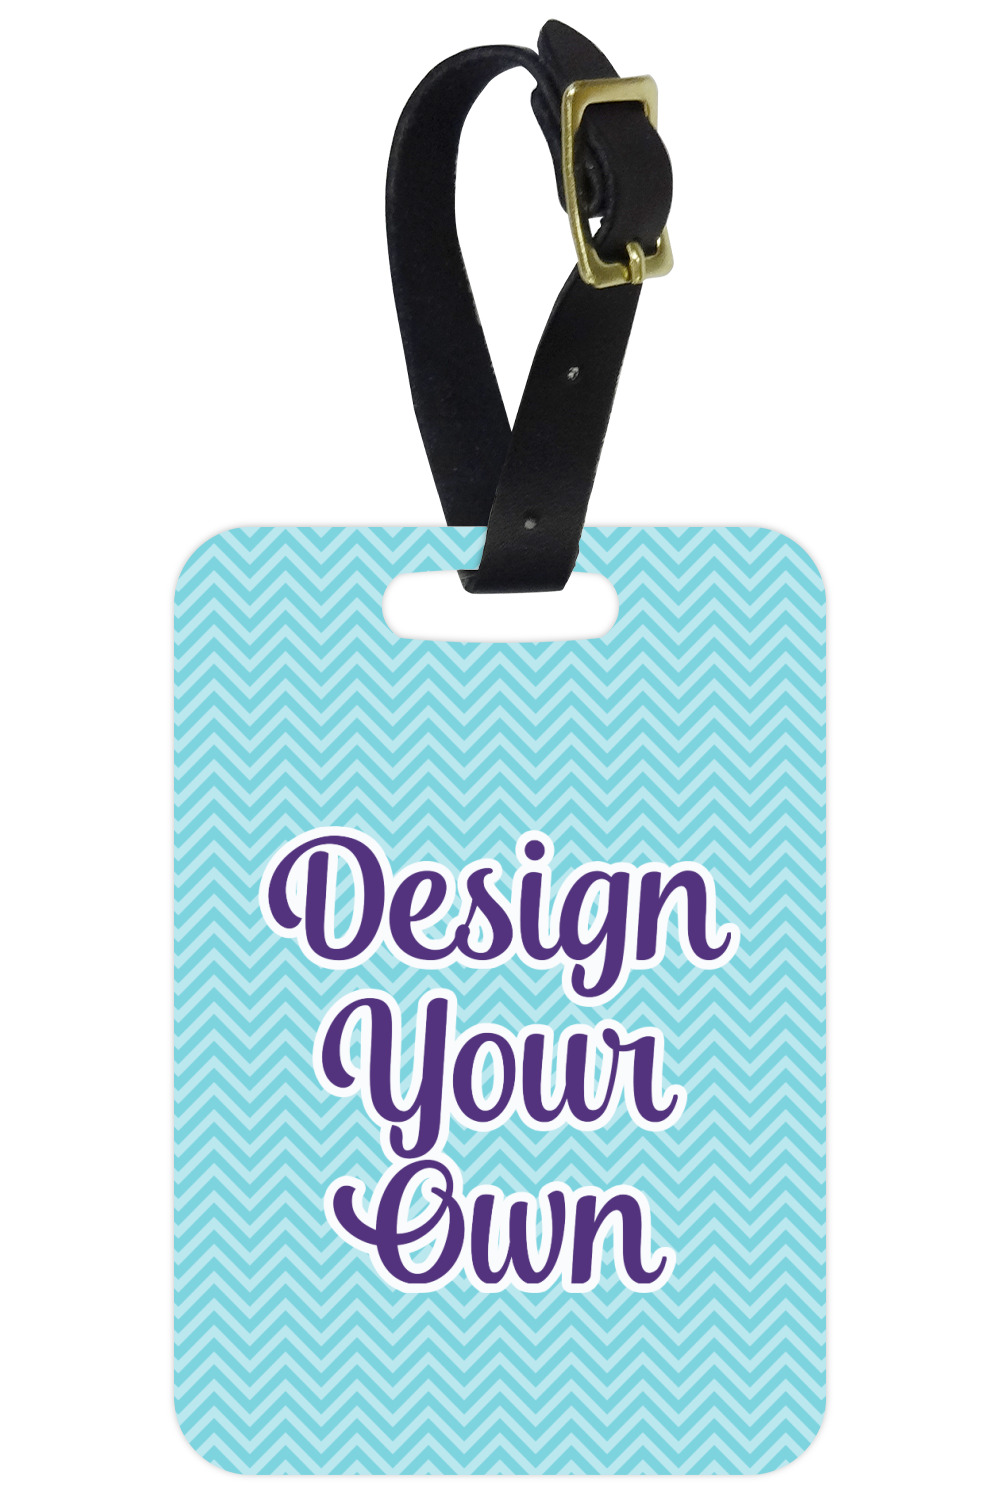 HOW TO TIE A LOUIS VUITTON LUGGAGE TAG ONTO YOUR BAGS 